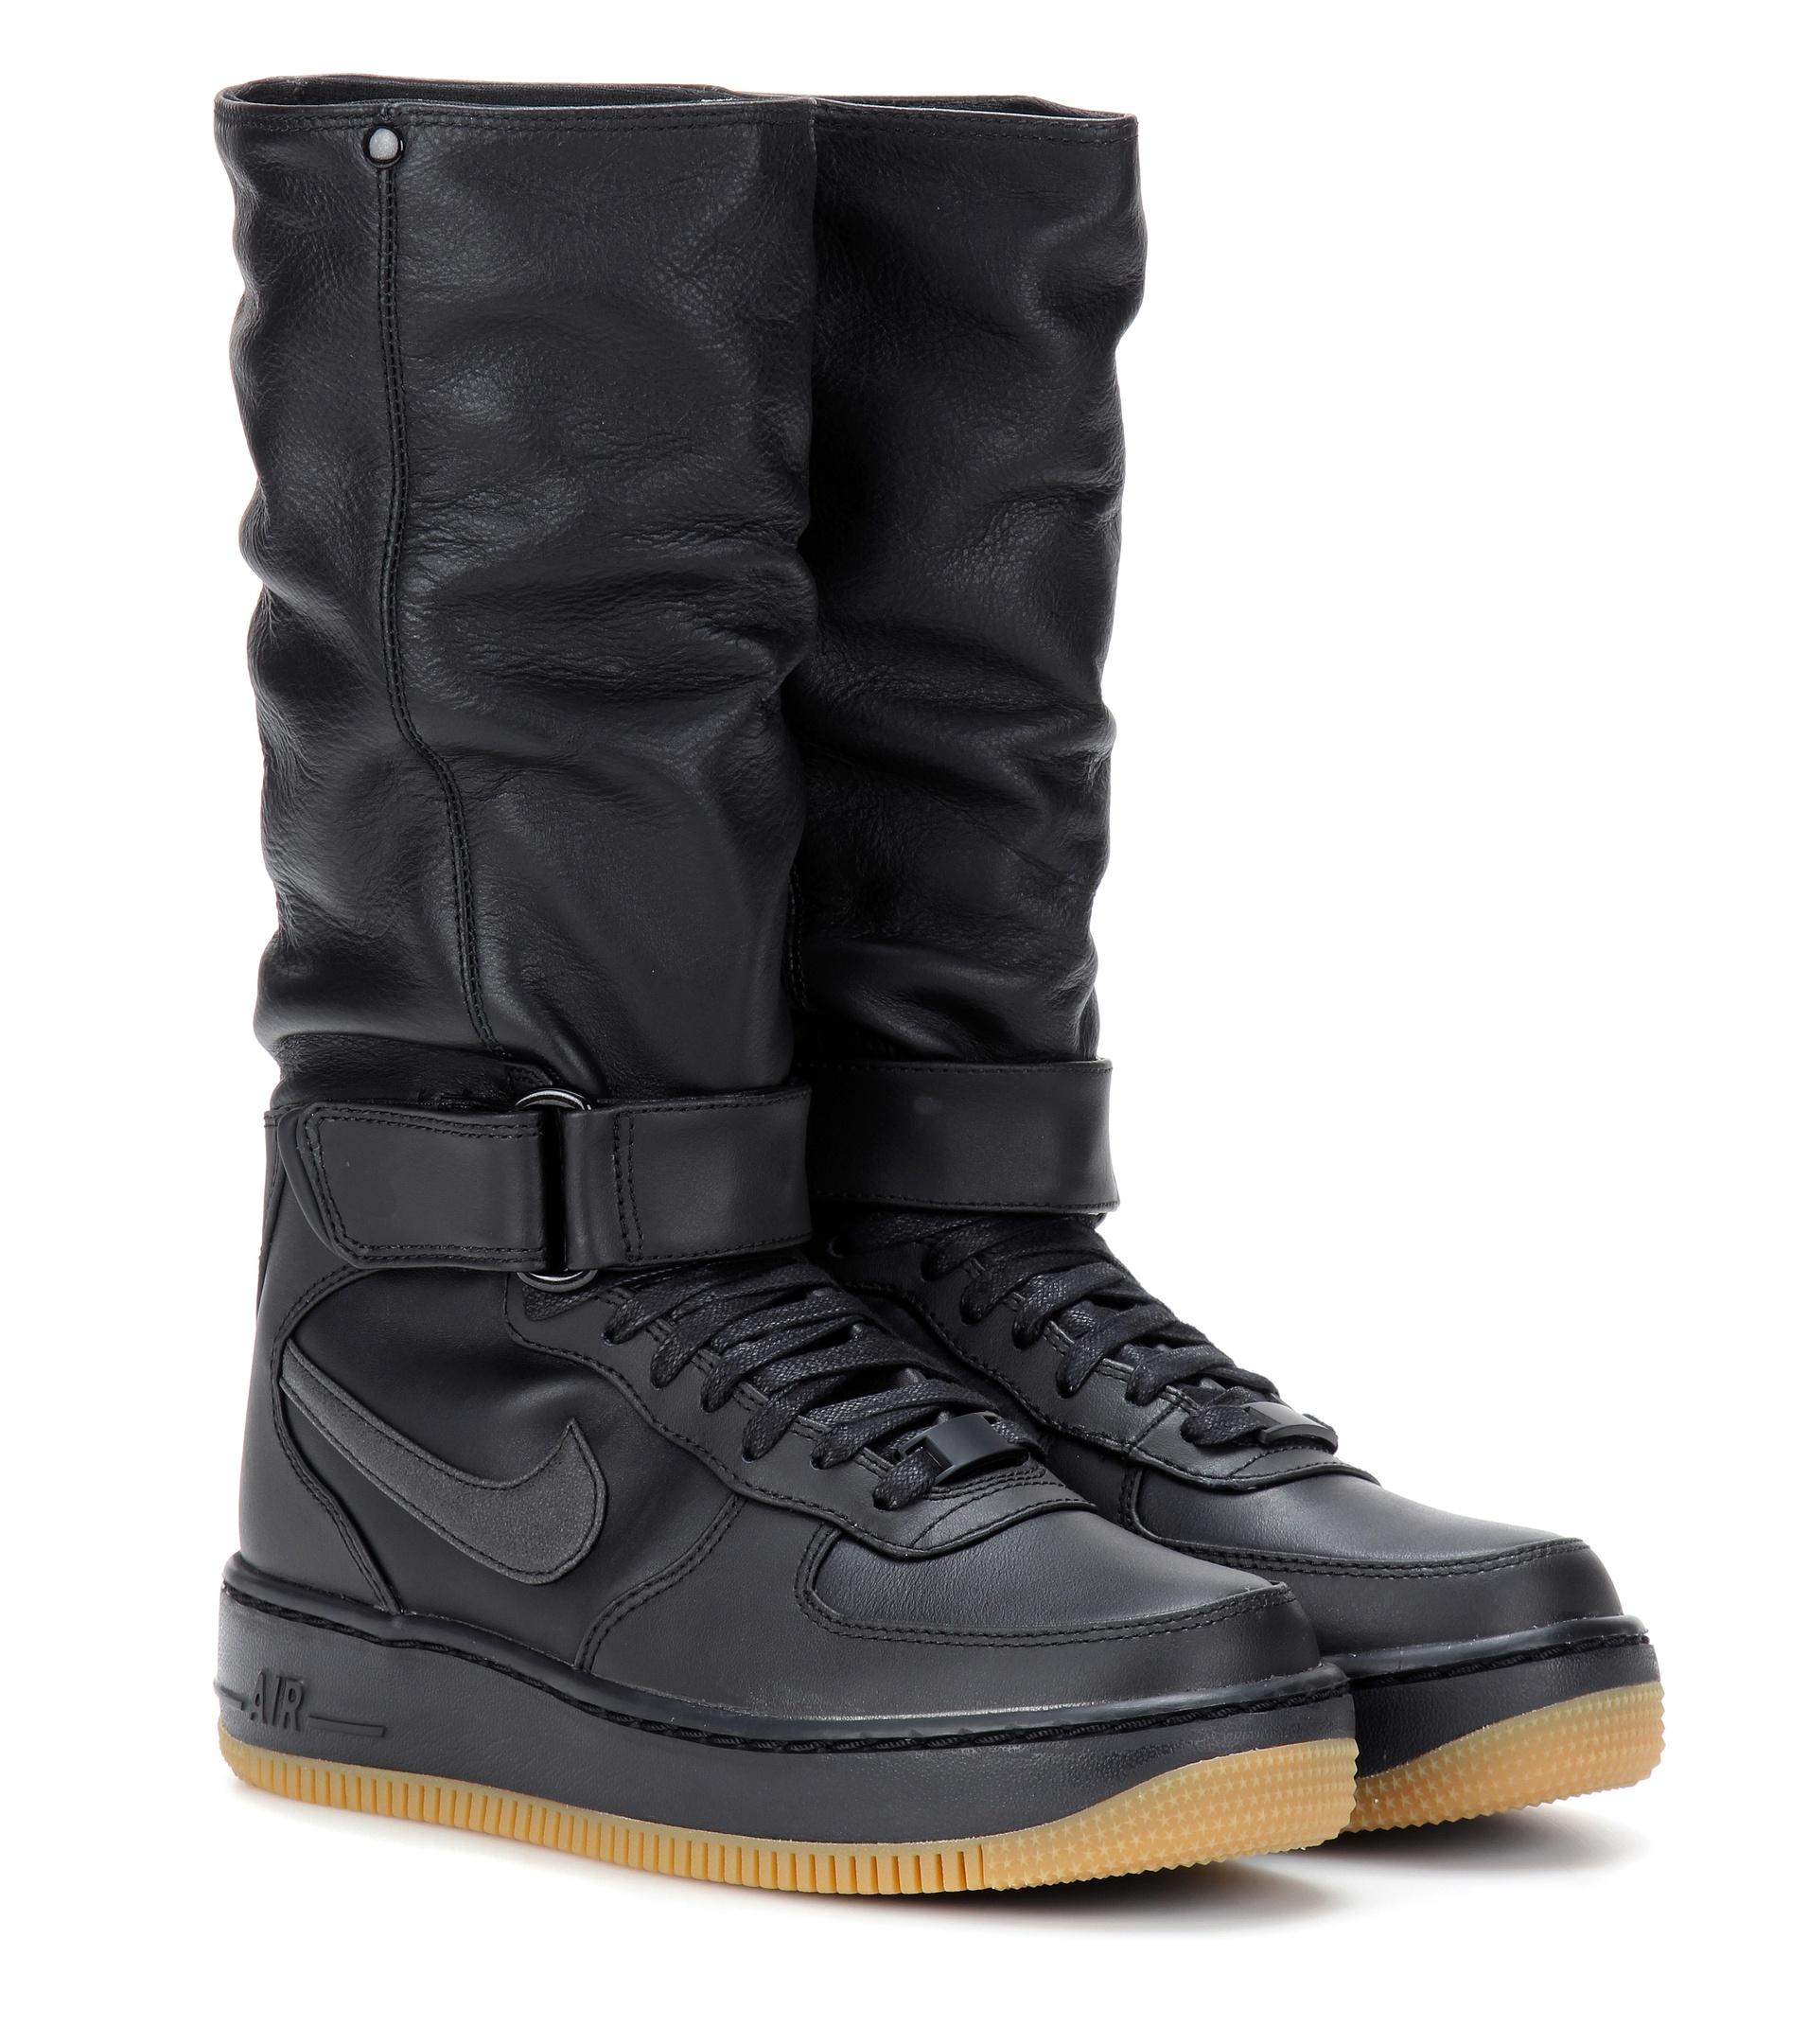 Nike Air Force 1 Upstep Warrior Leather Boots in Black | Lyst